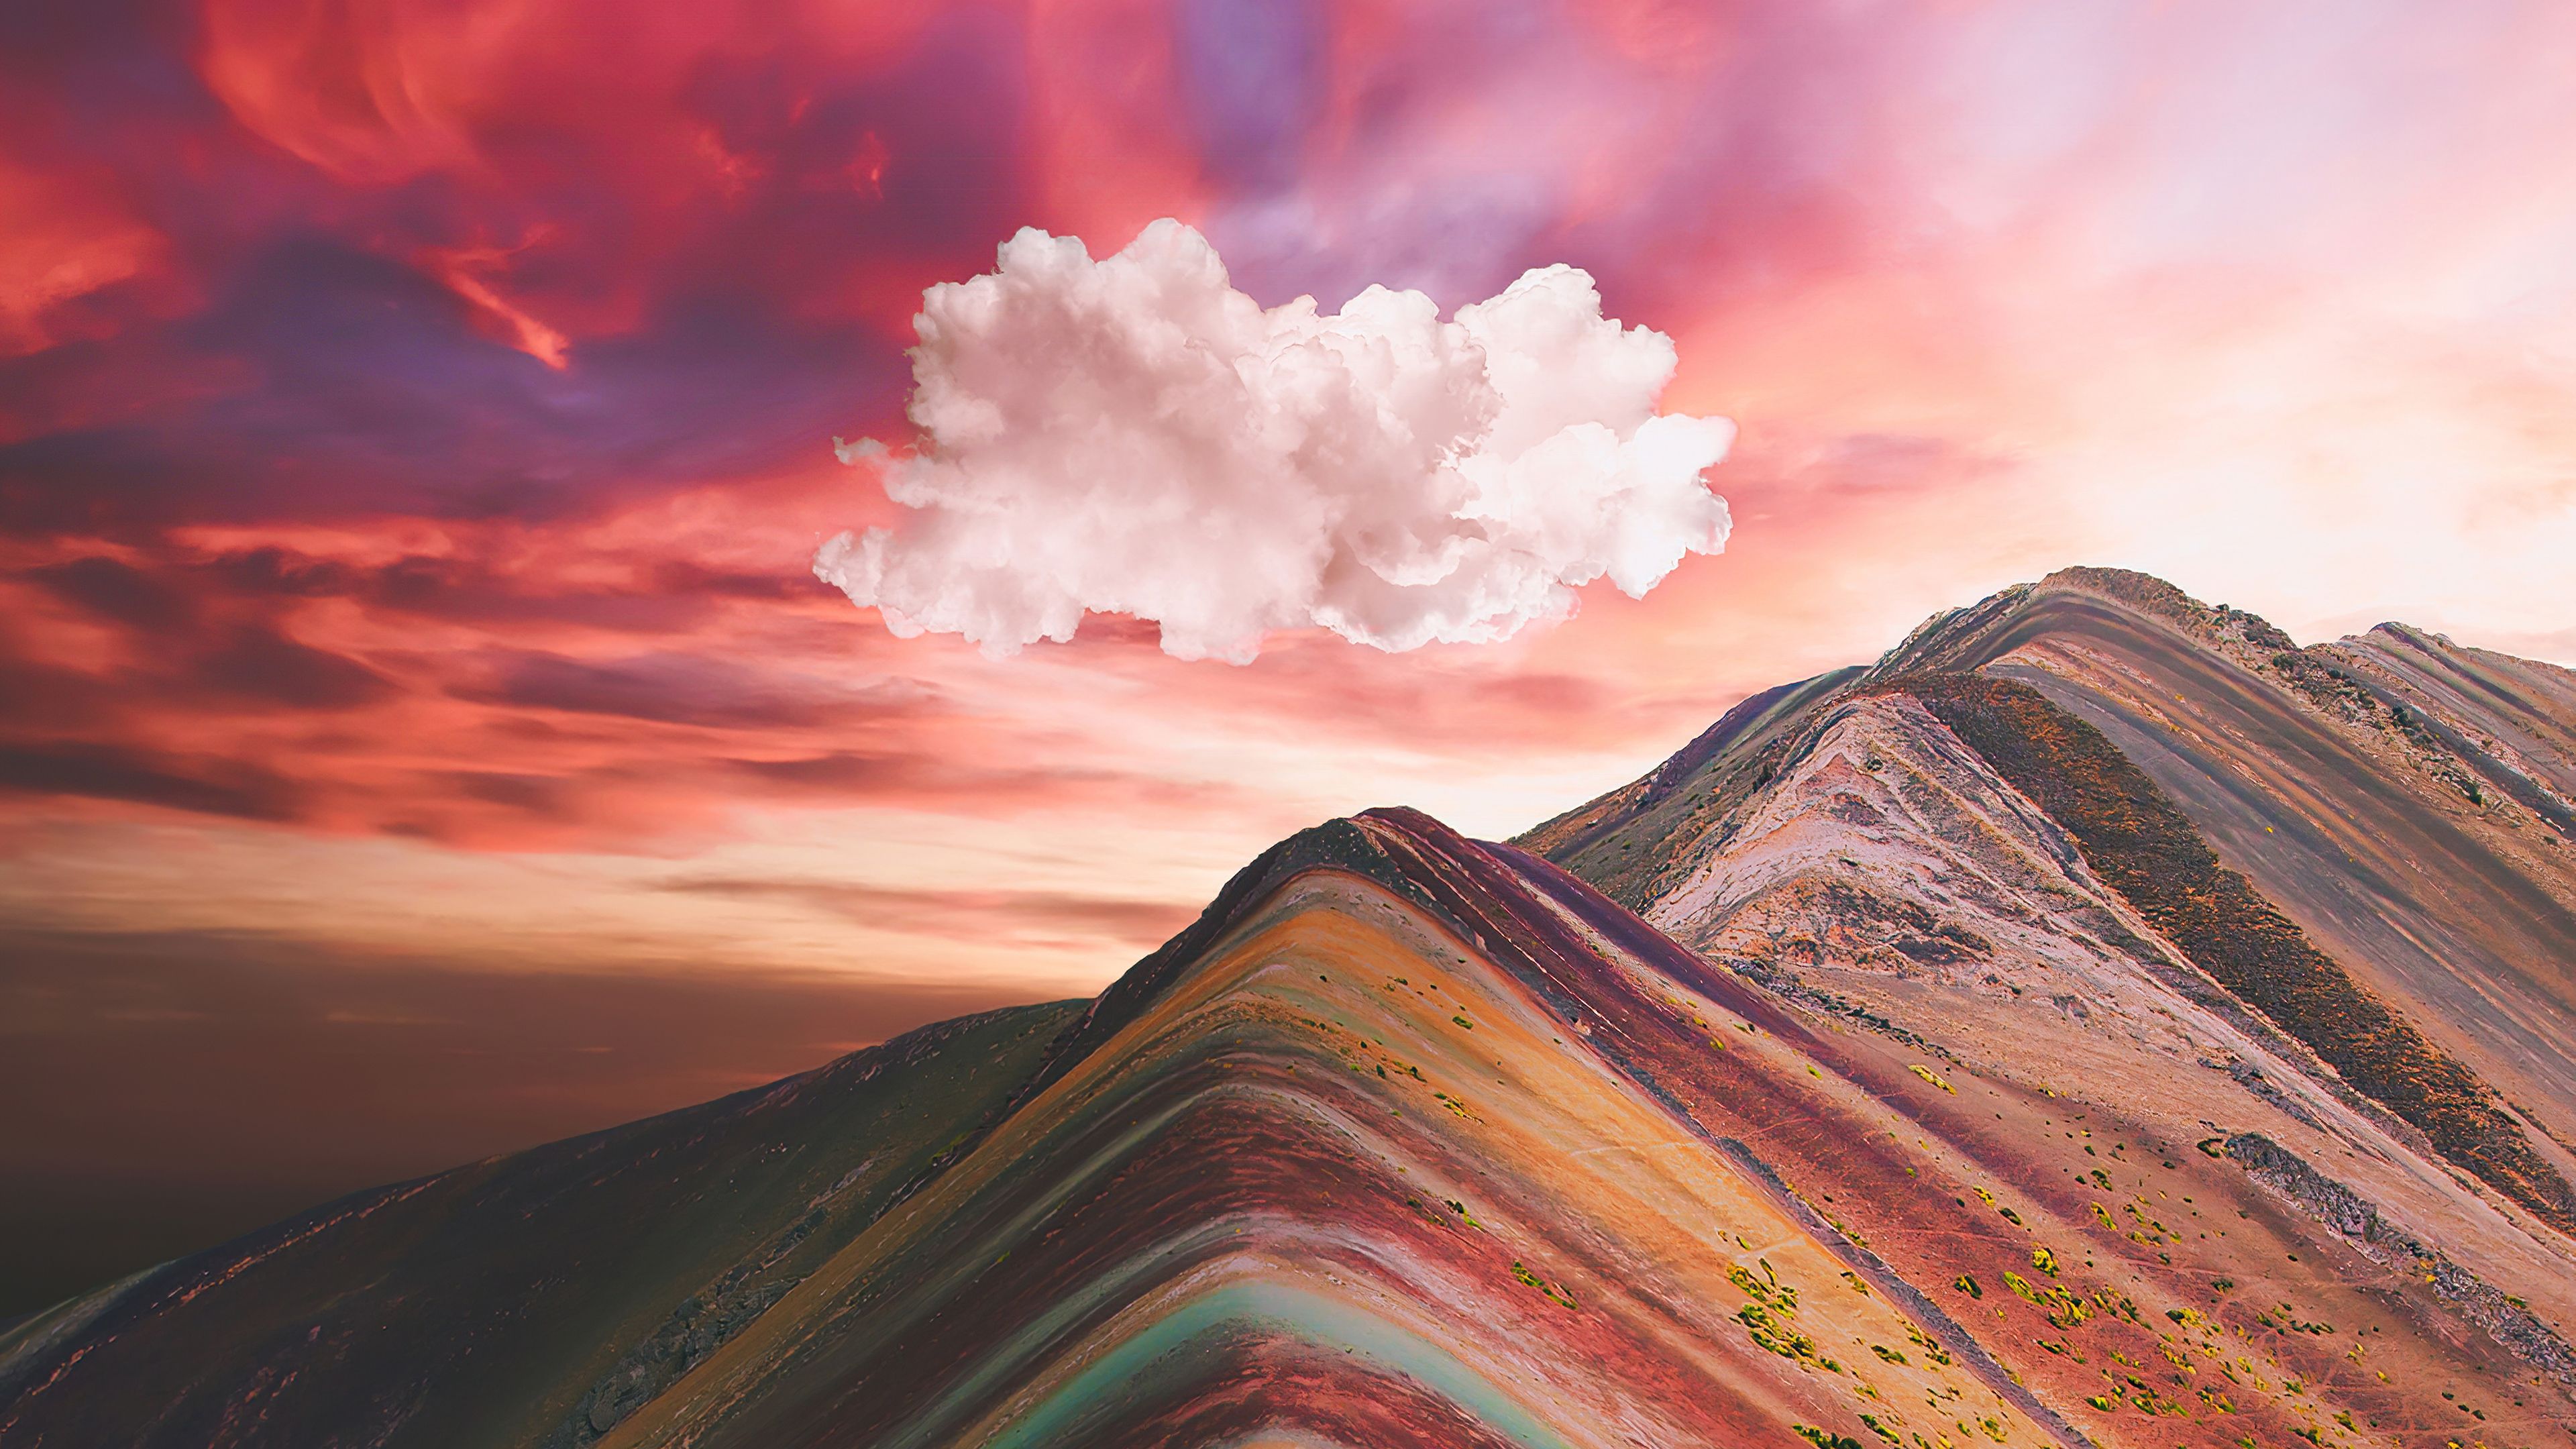 Rainbow Over Snowy Mountain Wallpapers